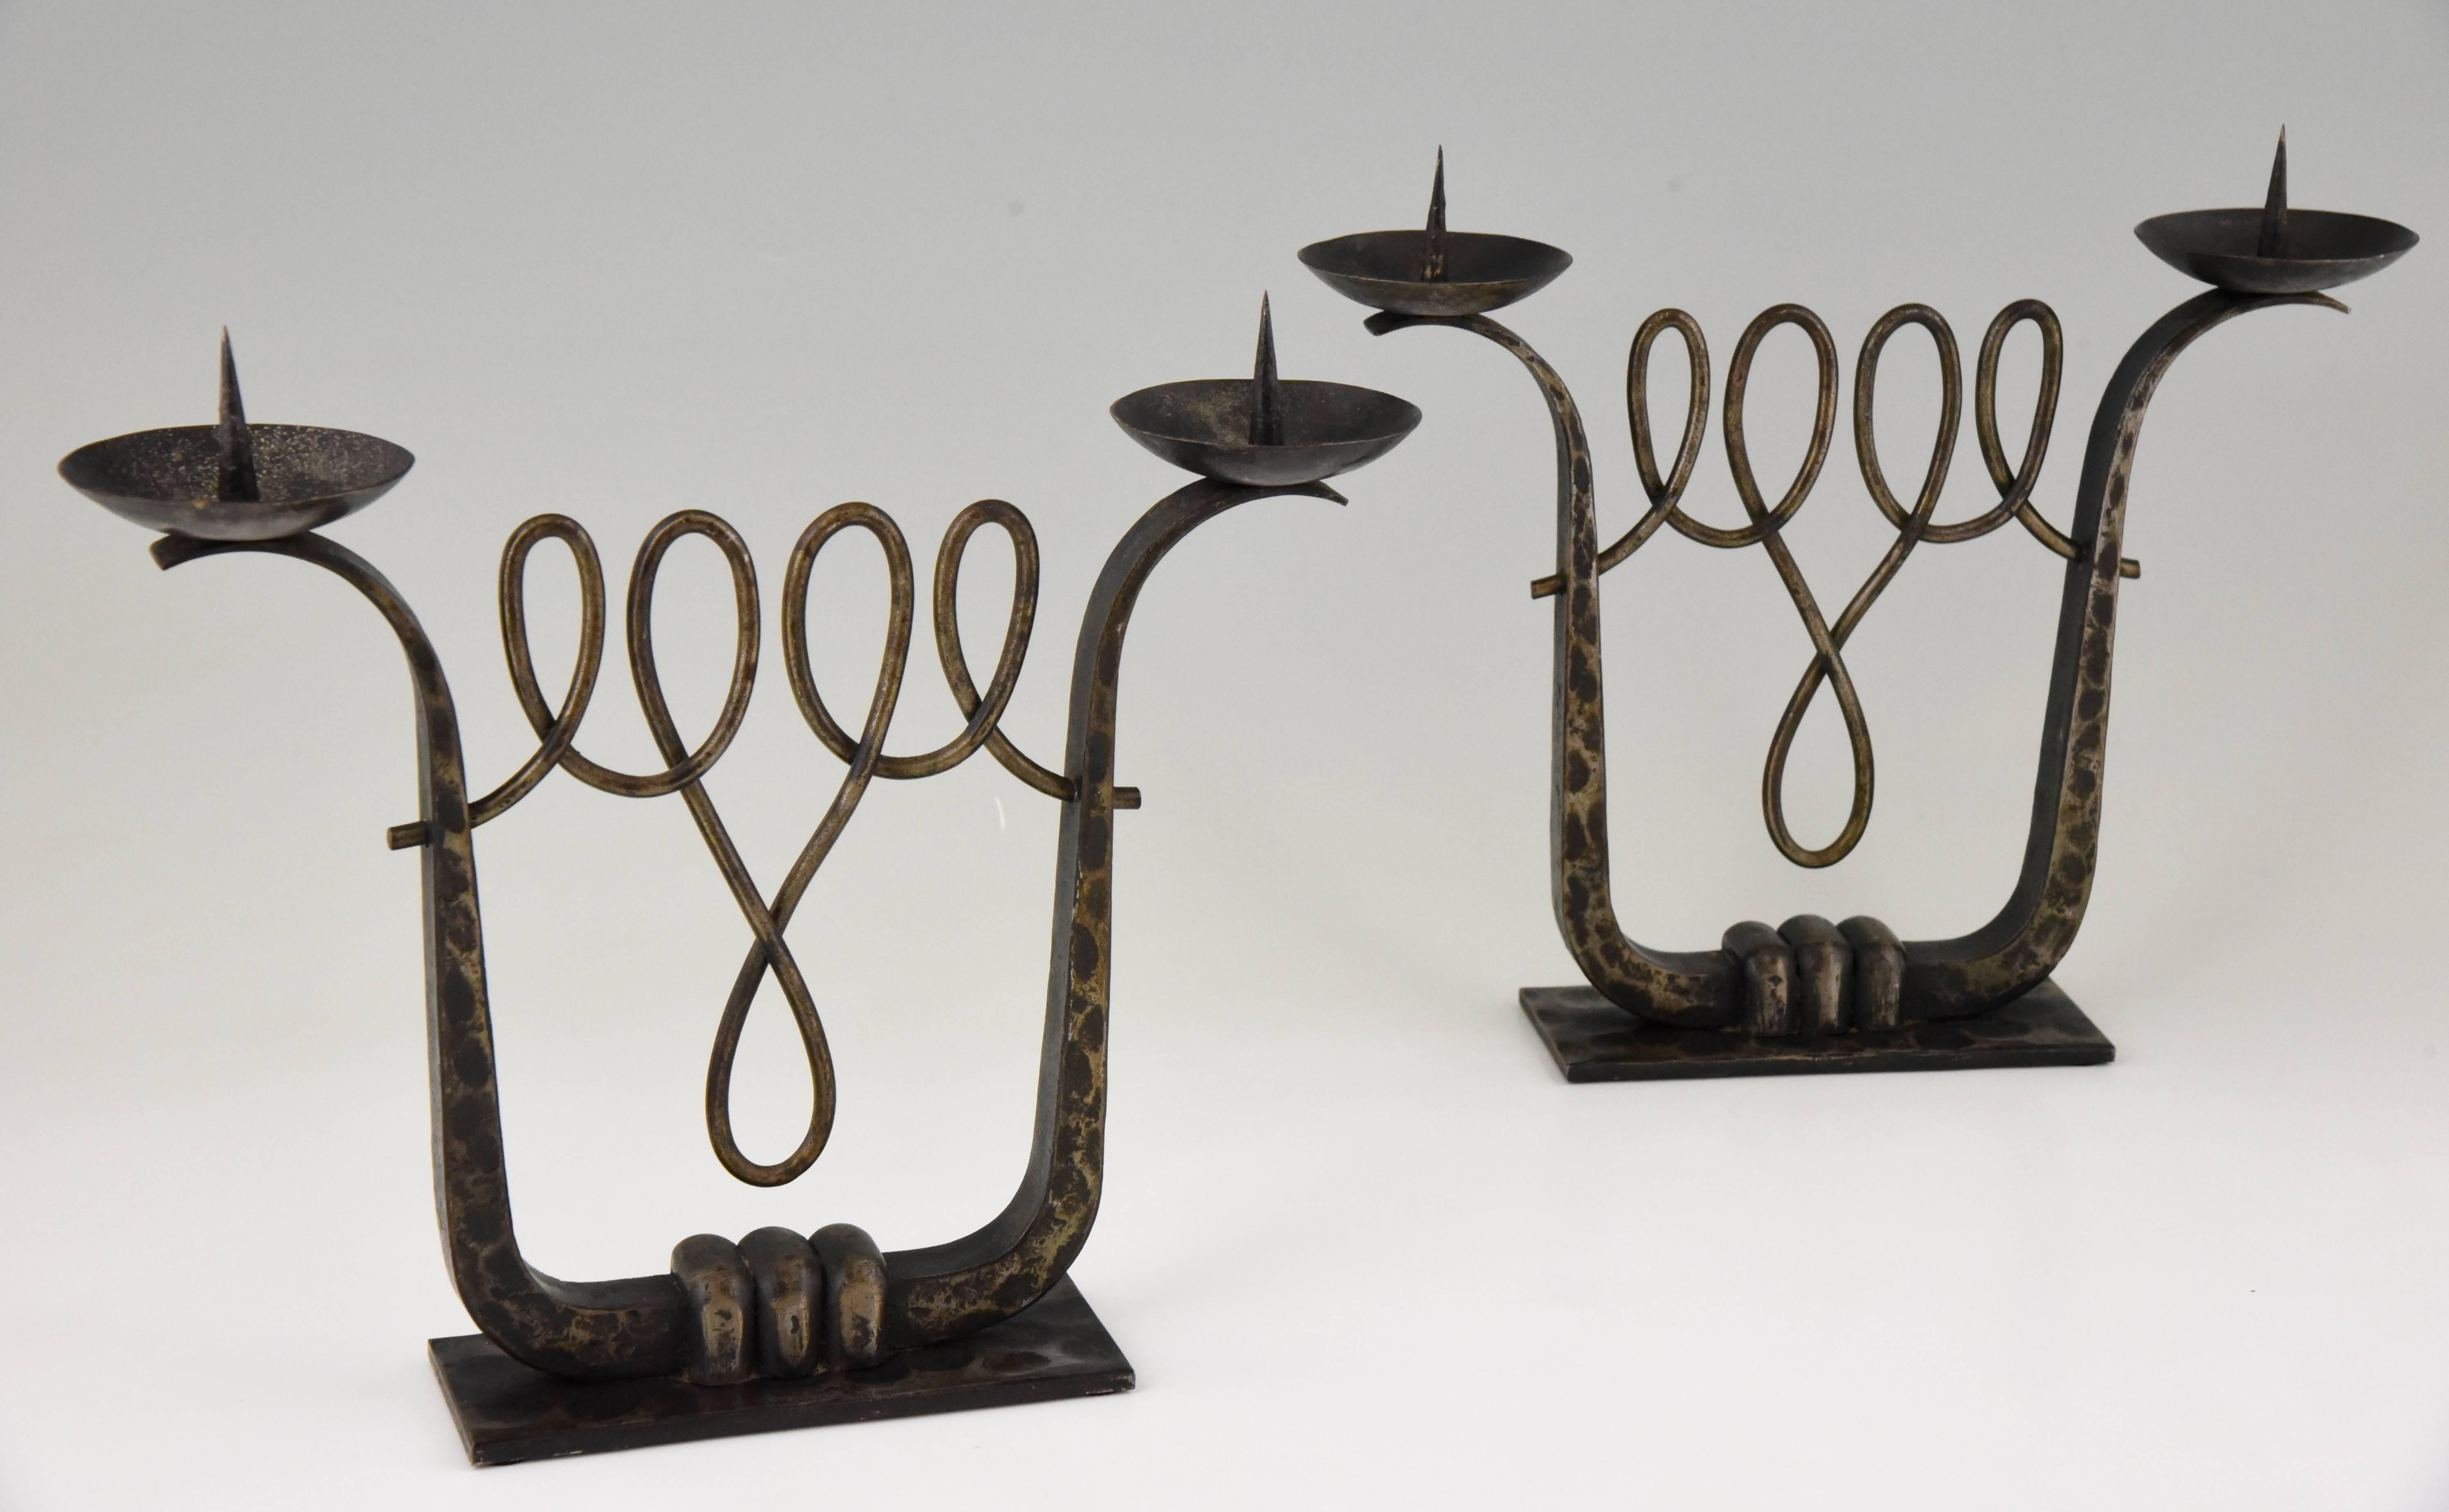 A fine pair of wrought iron two scone Art Deco candelabra by the French artist Michel Zadounaïsky.

Artist or maker: Michel Zadounaïsky.
Signature or marks: Zadounaïsky.
Style: Art Deco.
Date: 1925-1930.
Material: Patinated wrought